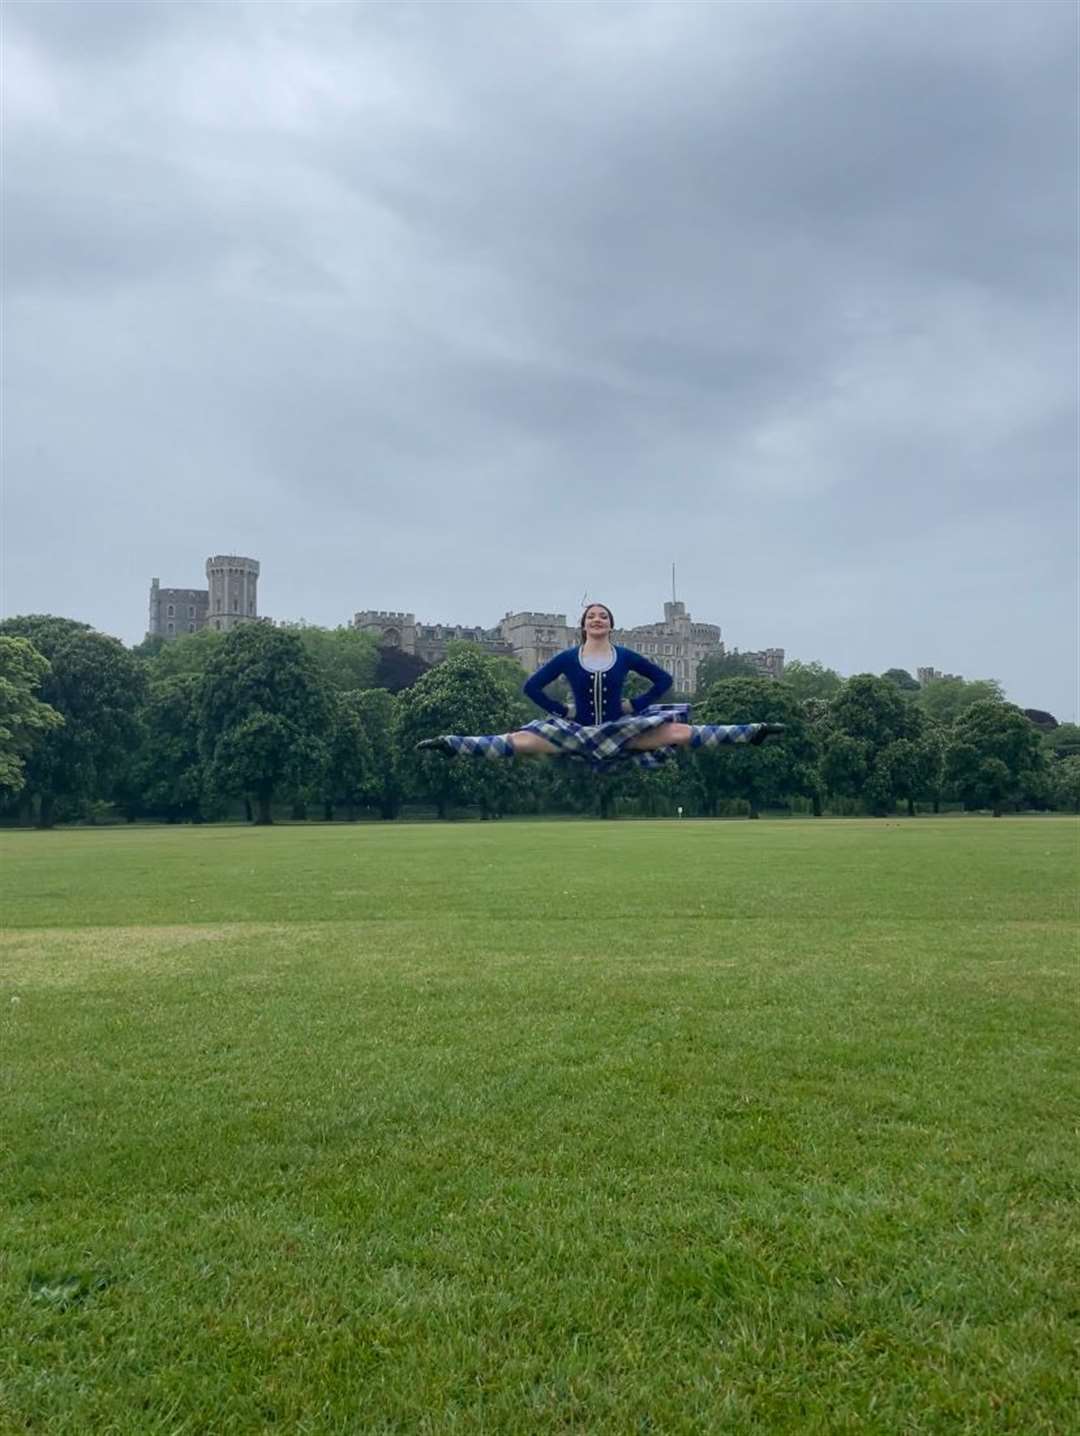 Michelle Gordon, shows World Champion style in front of Windsor Castle.